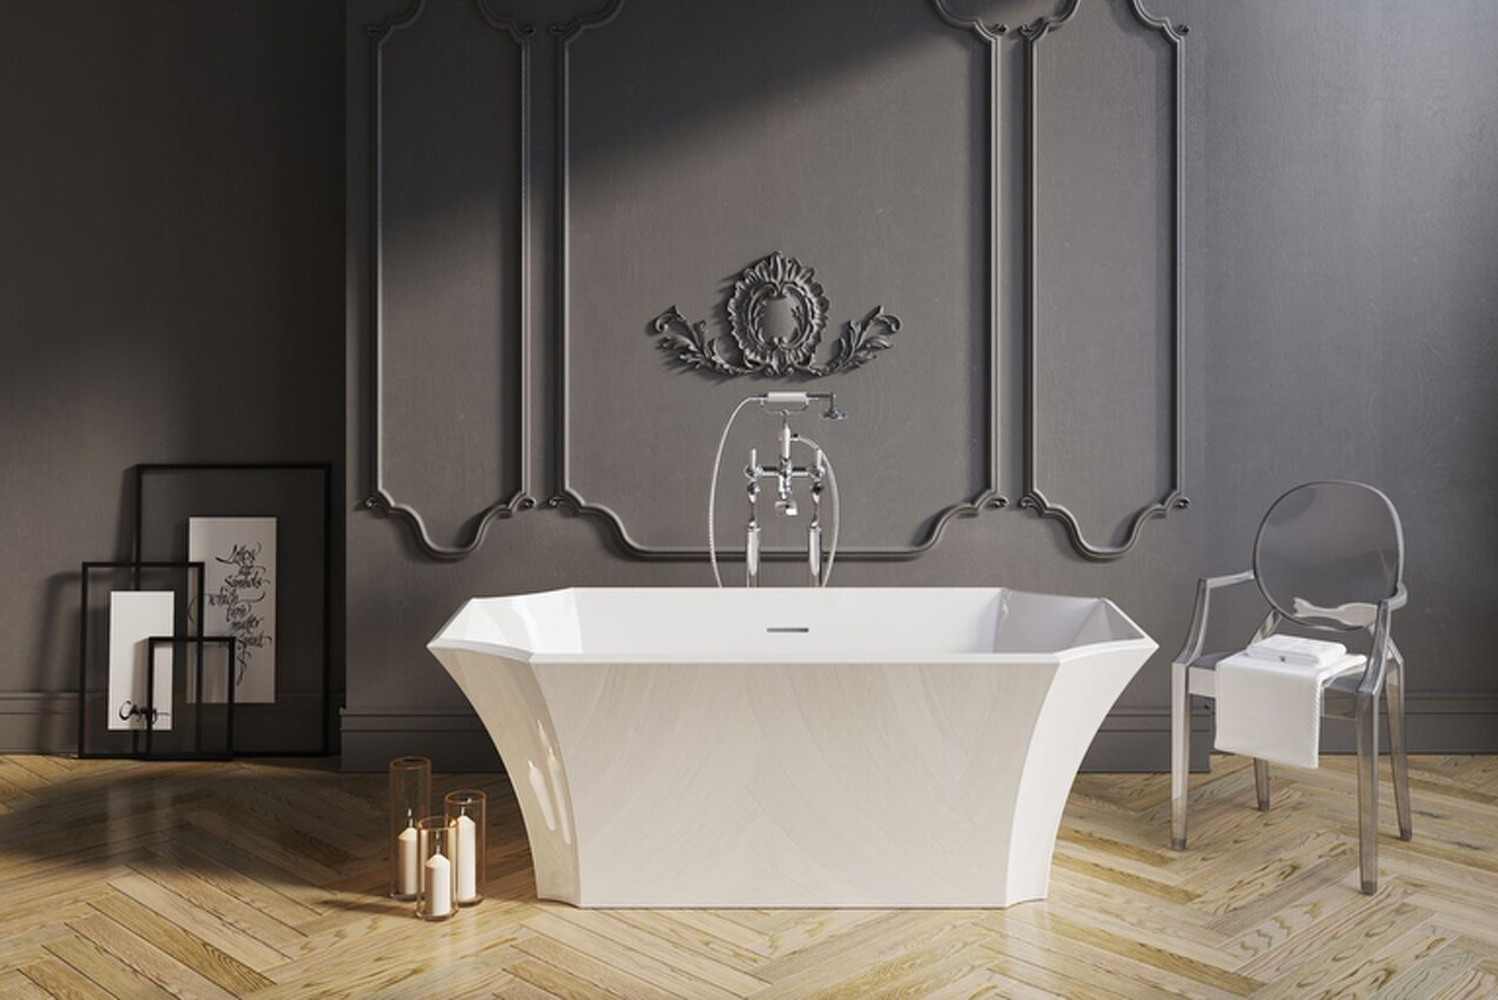 The new tub  which has an early twentieth-century style design  has generous proportions center drain and smooth surfa